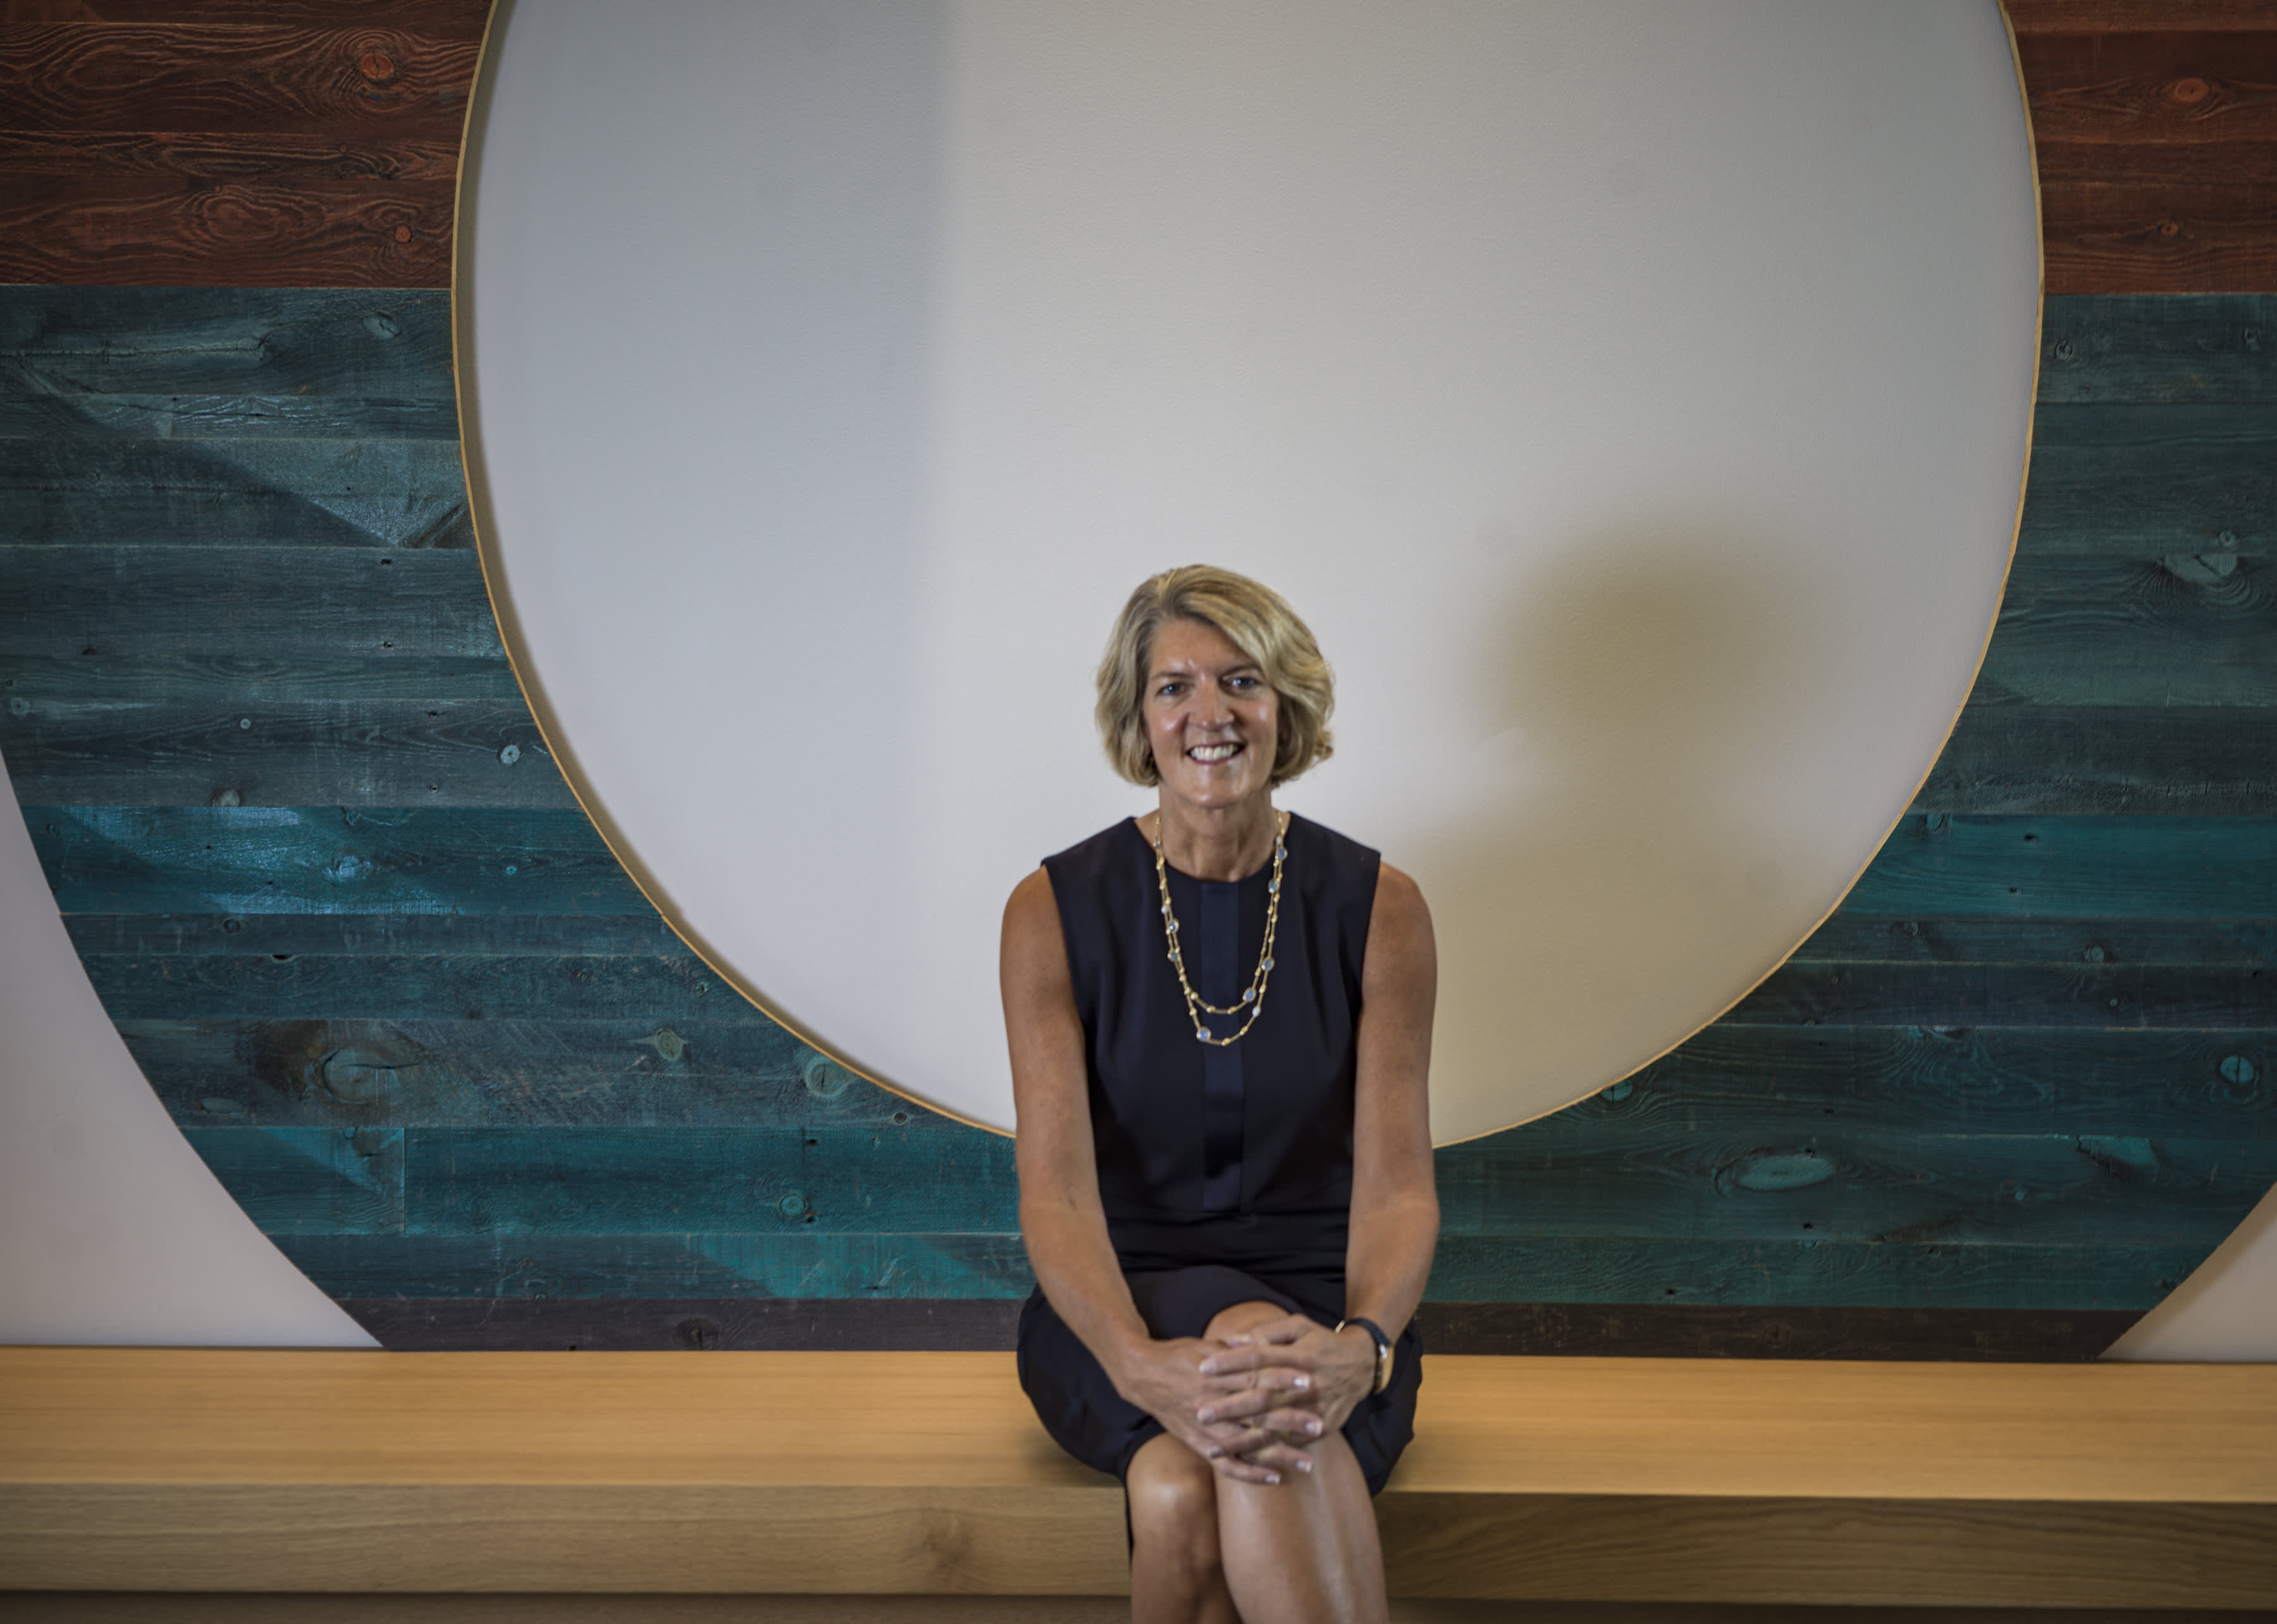 Land O'Lakes CEO Beth Ford on the importance of speaking up at work